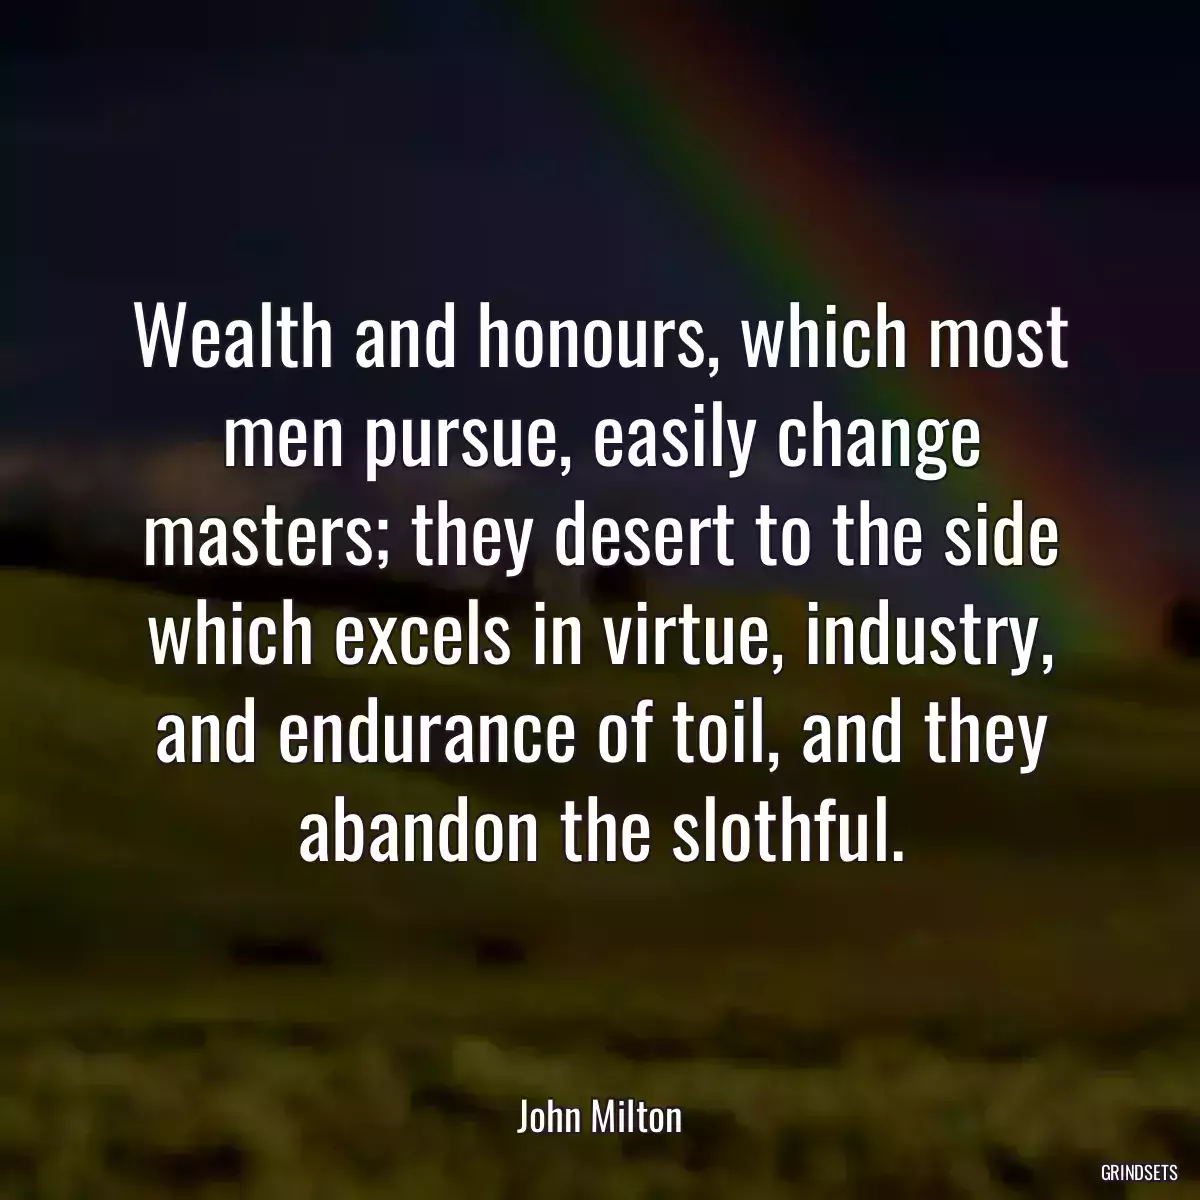 Wealth and honours, which most men pursue, easily change masters; they desert to the side which excels in virtue, industry, and endurance of toil, and they abandon the slothful.